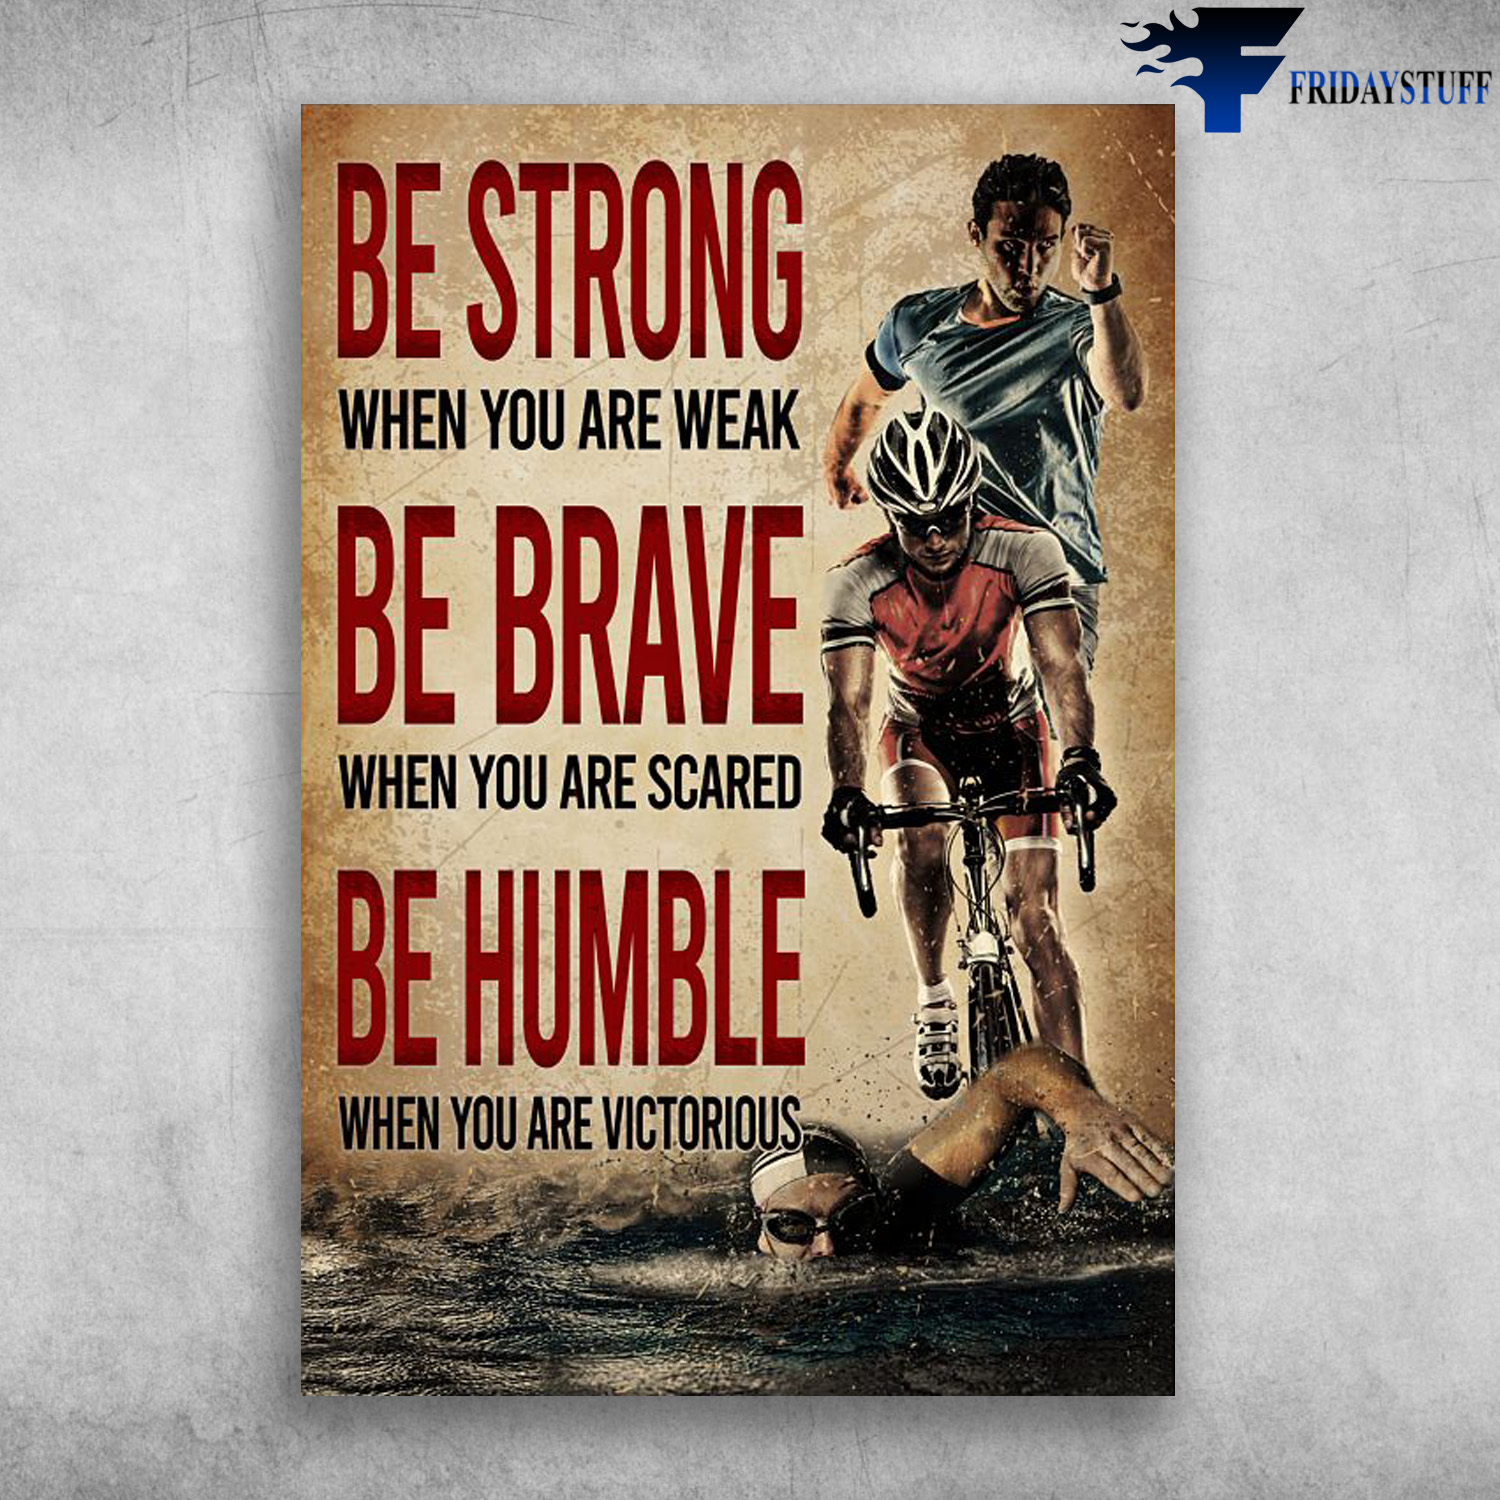 Running, Cycling, Swimming - Be Strong When You Are Weak, Be Brave When You Are Scaredm Be Humble When You Are Victorious